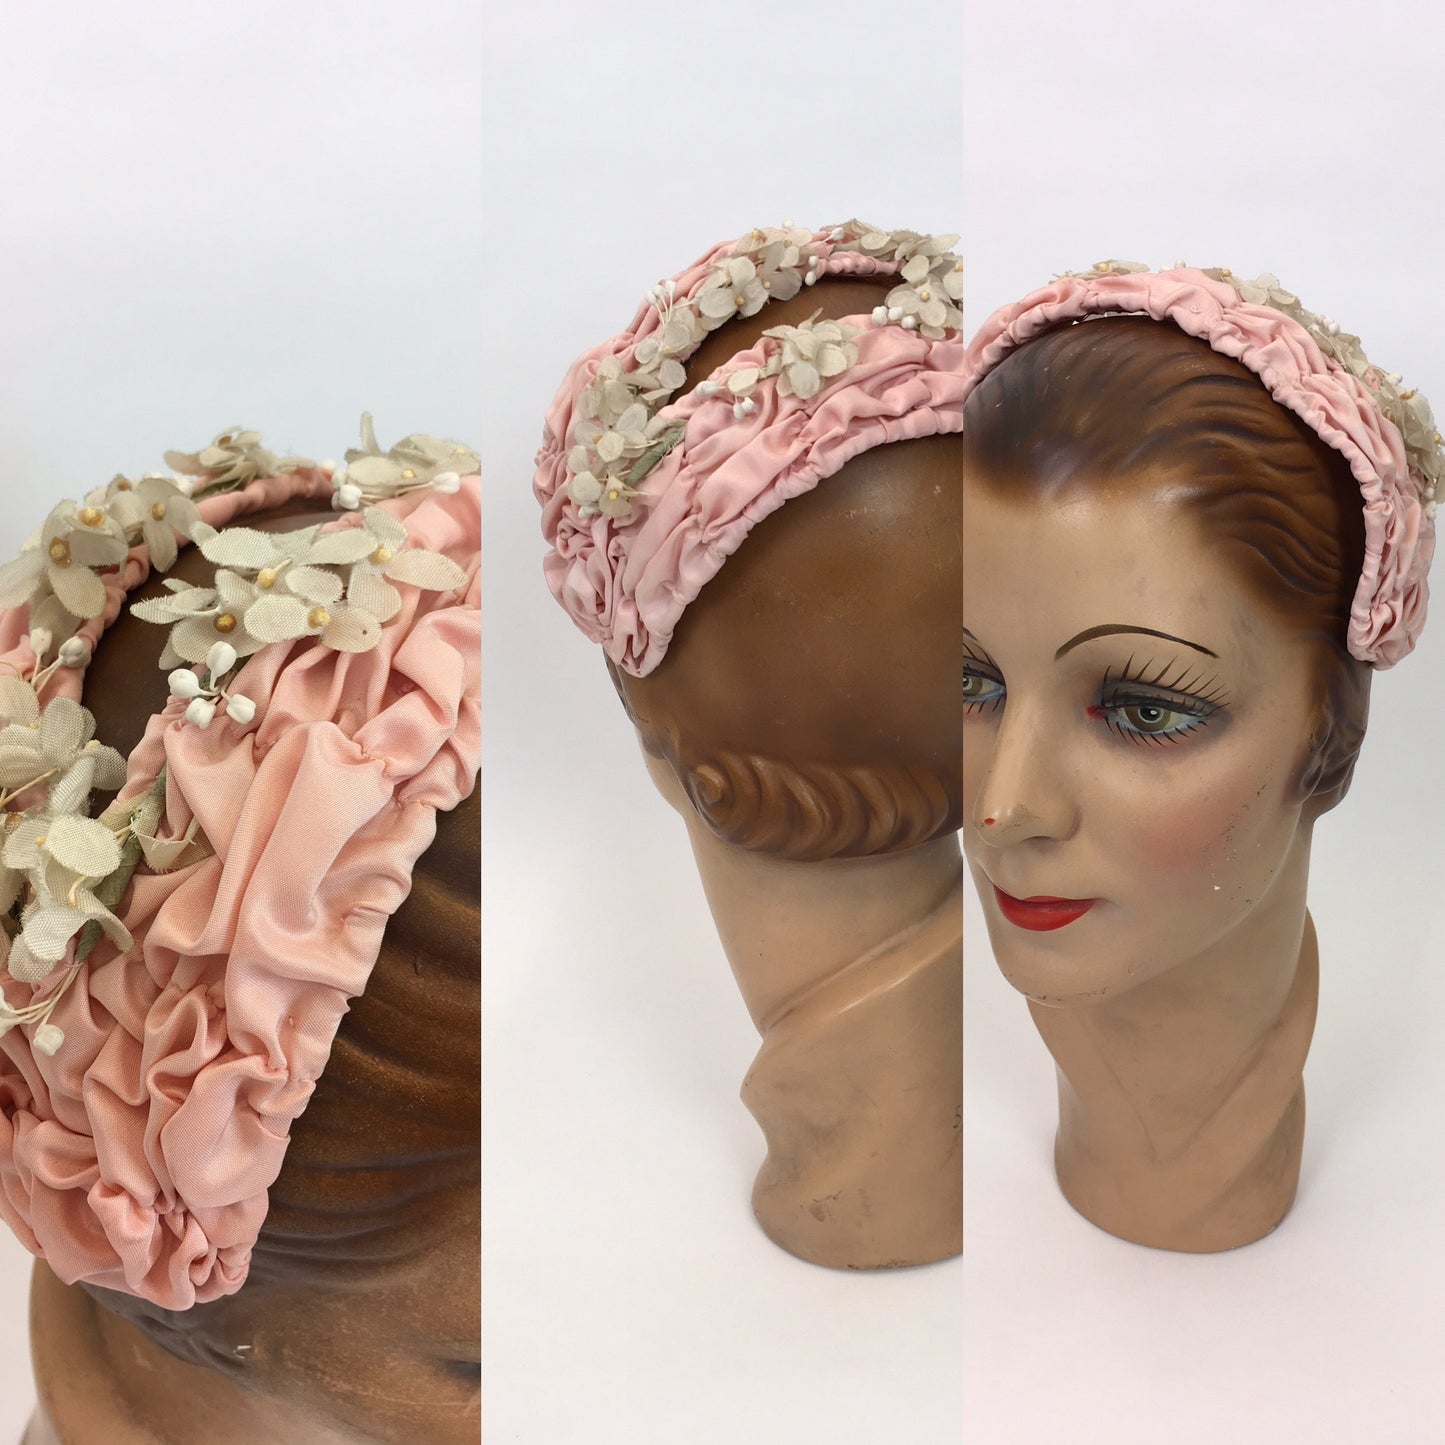 Original 1950s Pink Ruched Headpiece - Adorned with Beautiful Delicate Ivory Florals